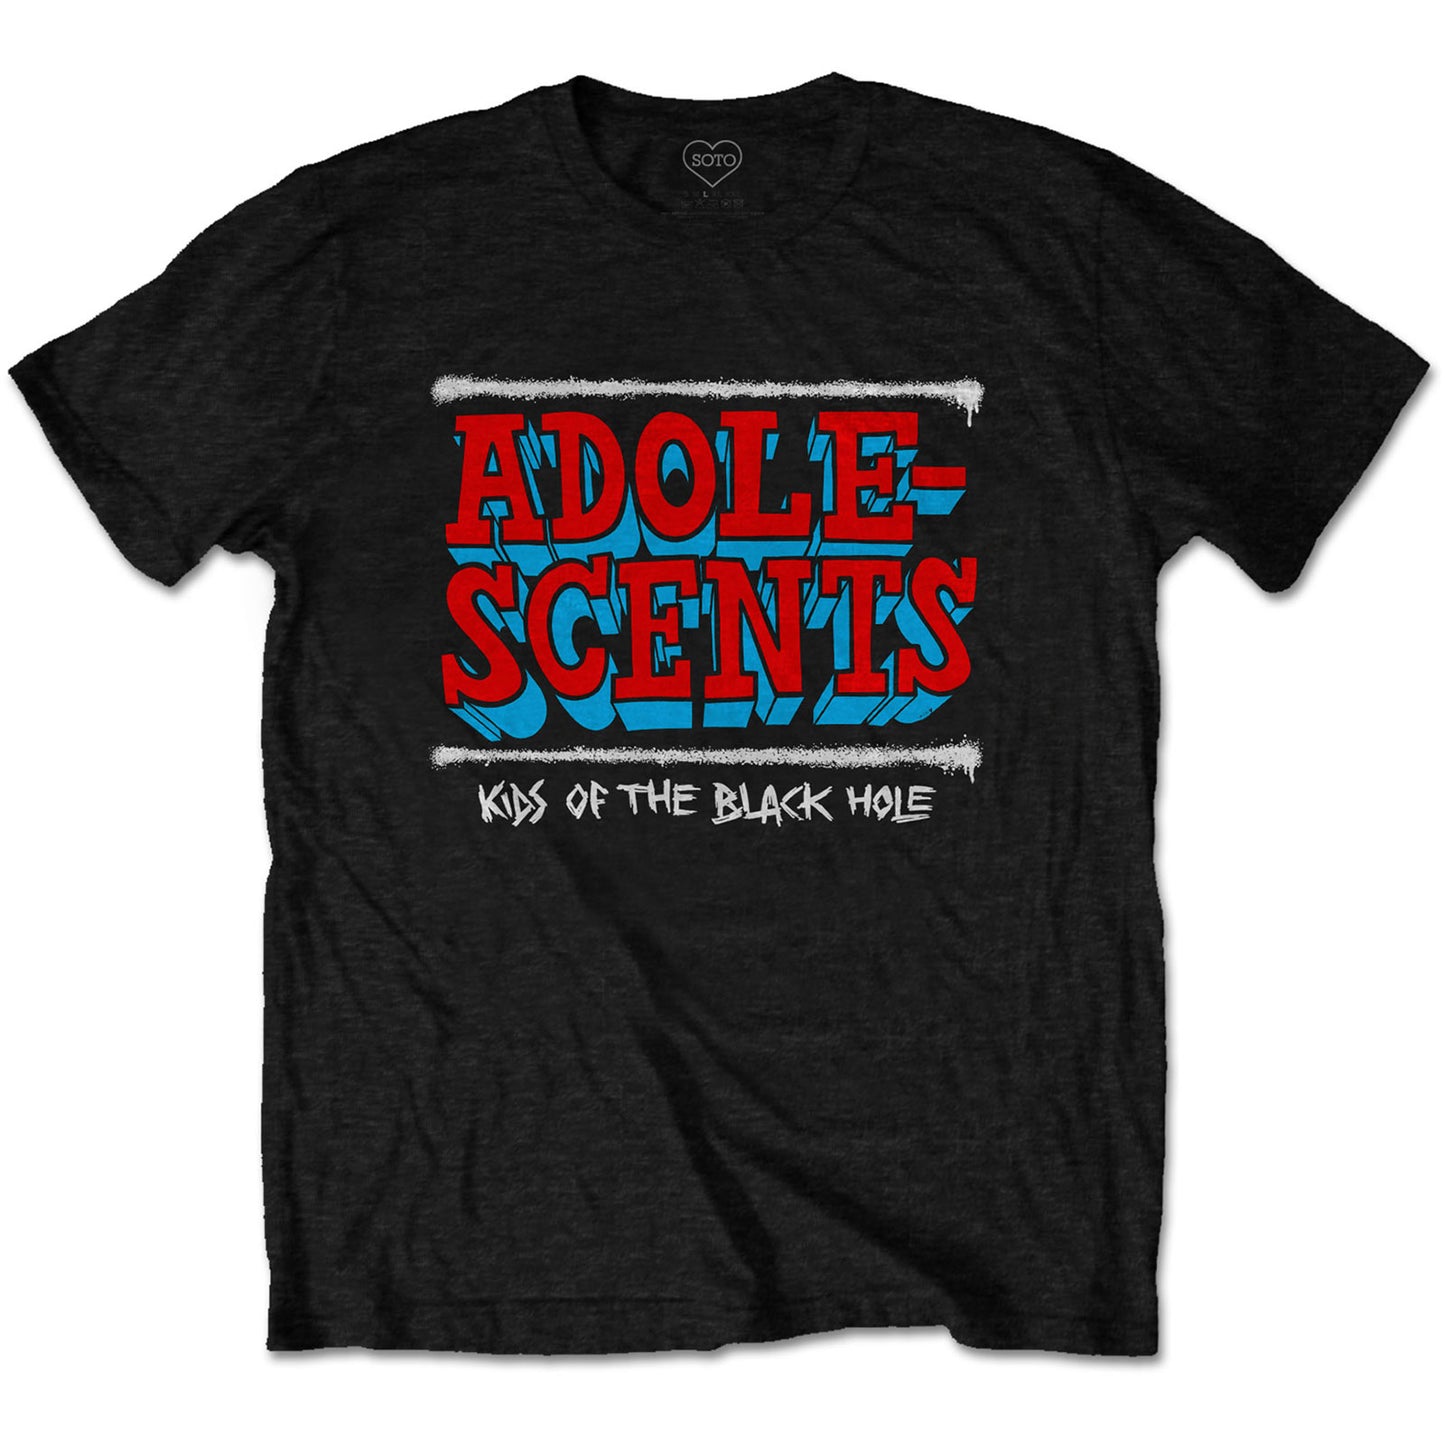 The Adolescents T-Shirt: Kids Of The Black Hole